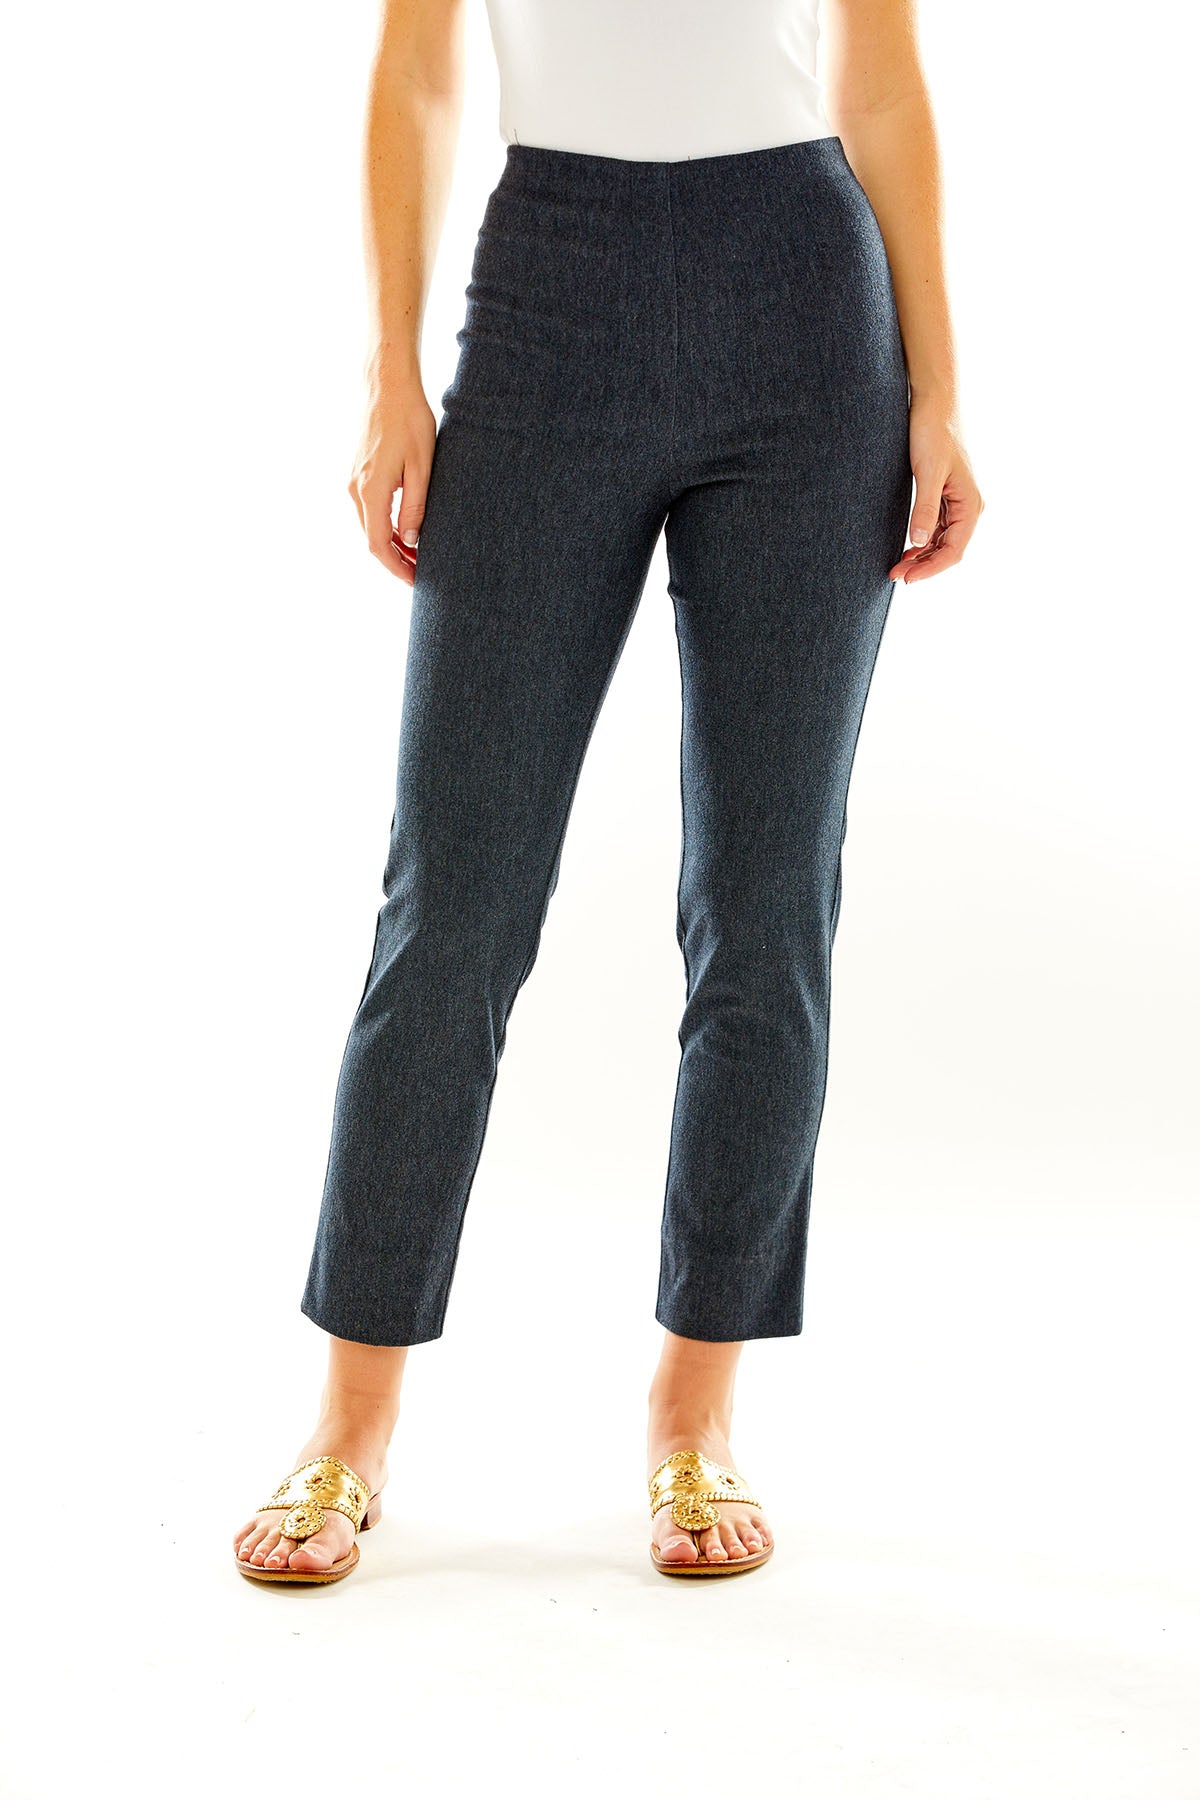 The Sara Campbell Flannel Sheri Pant in Denim